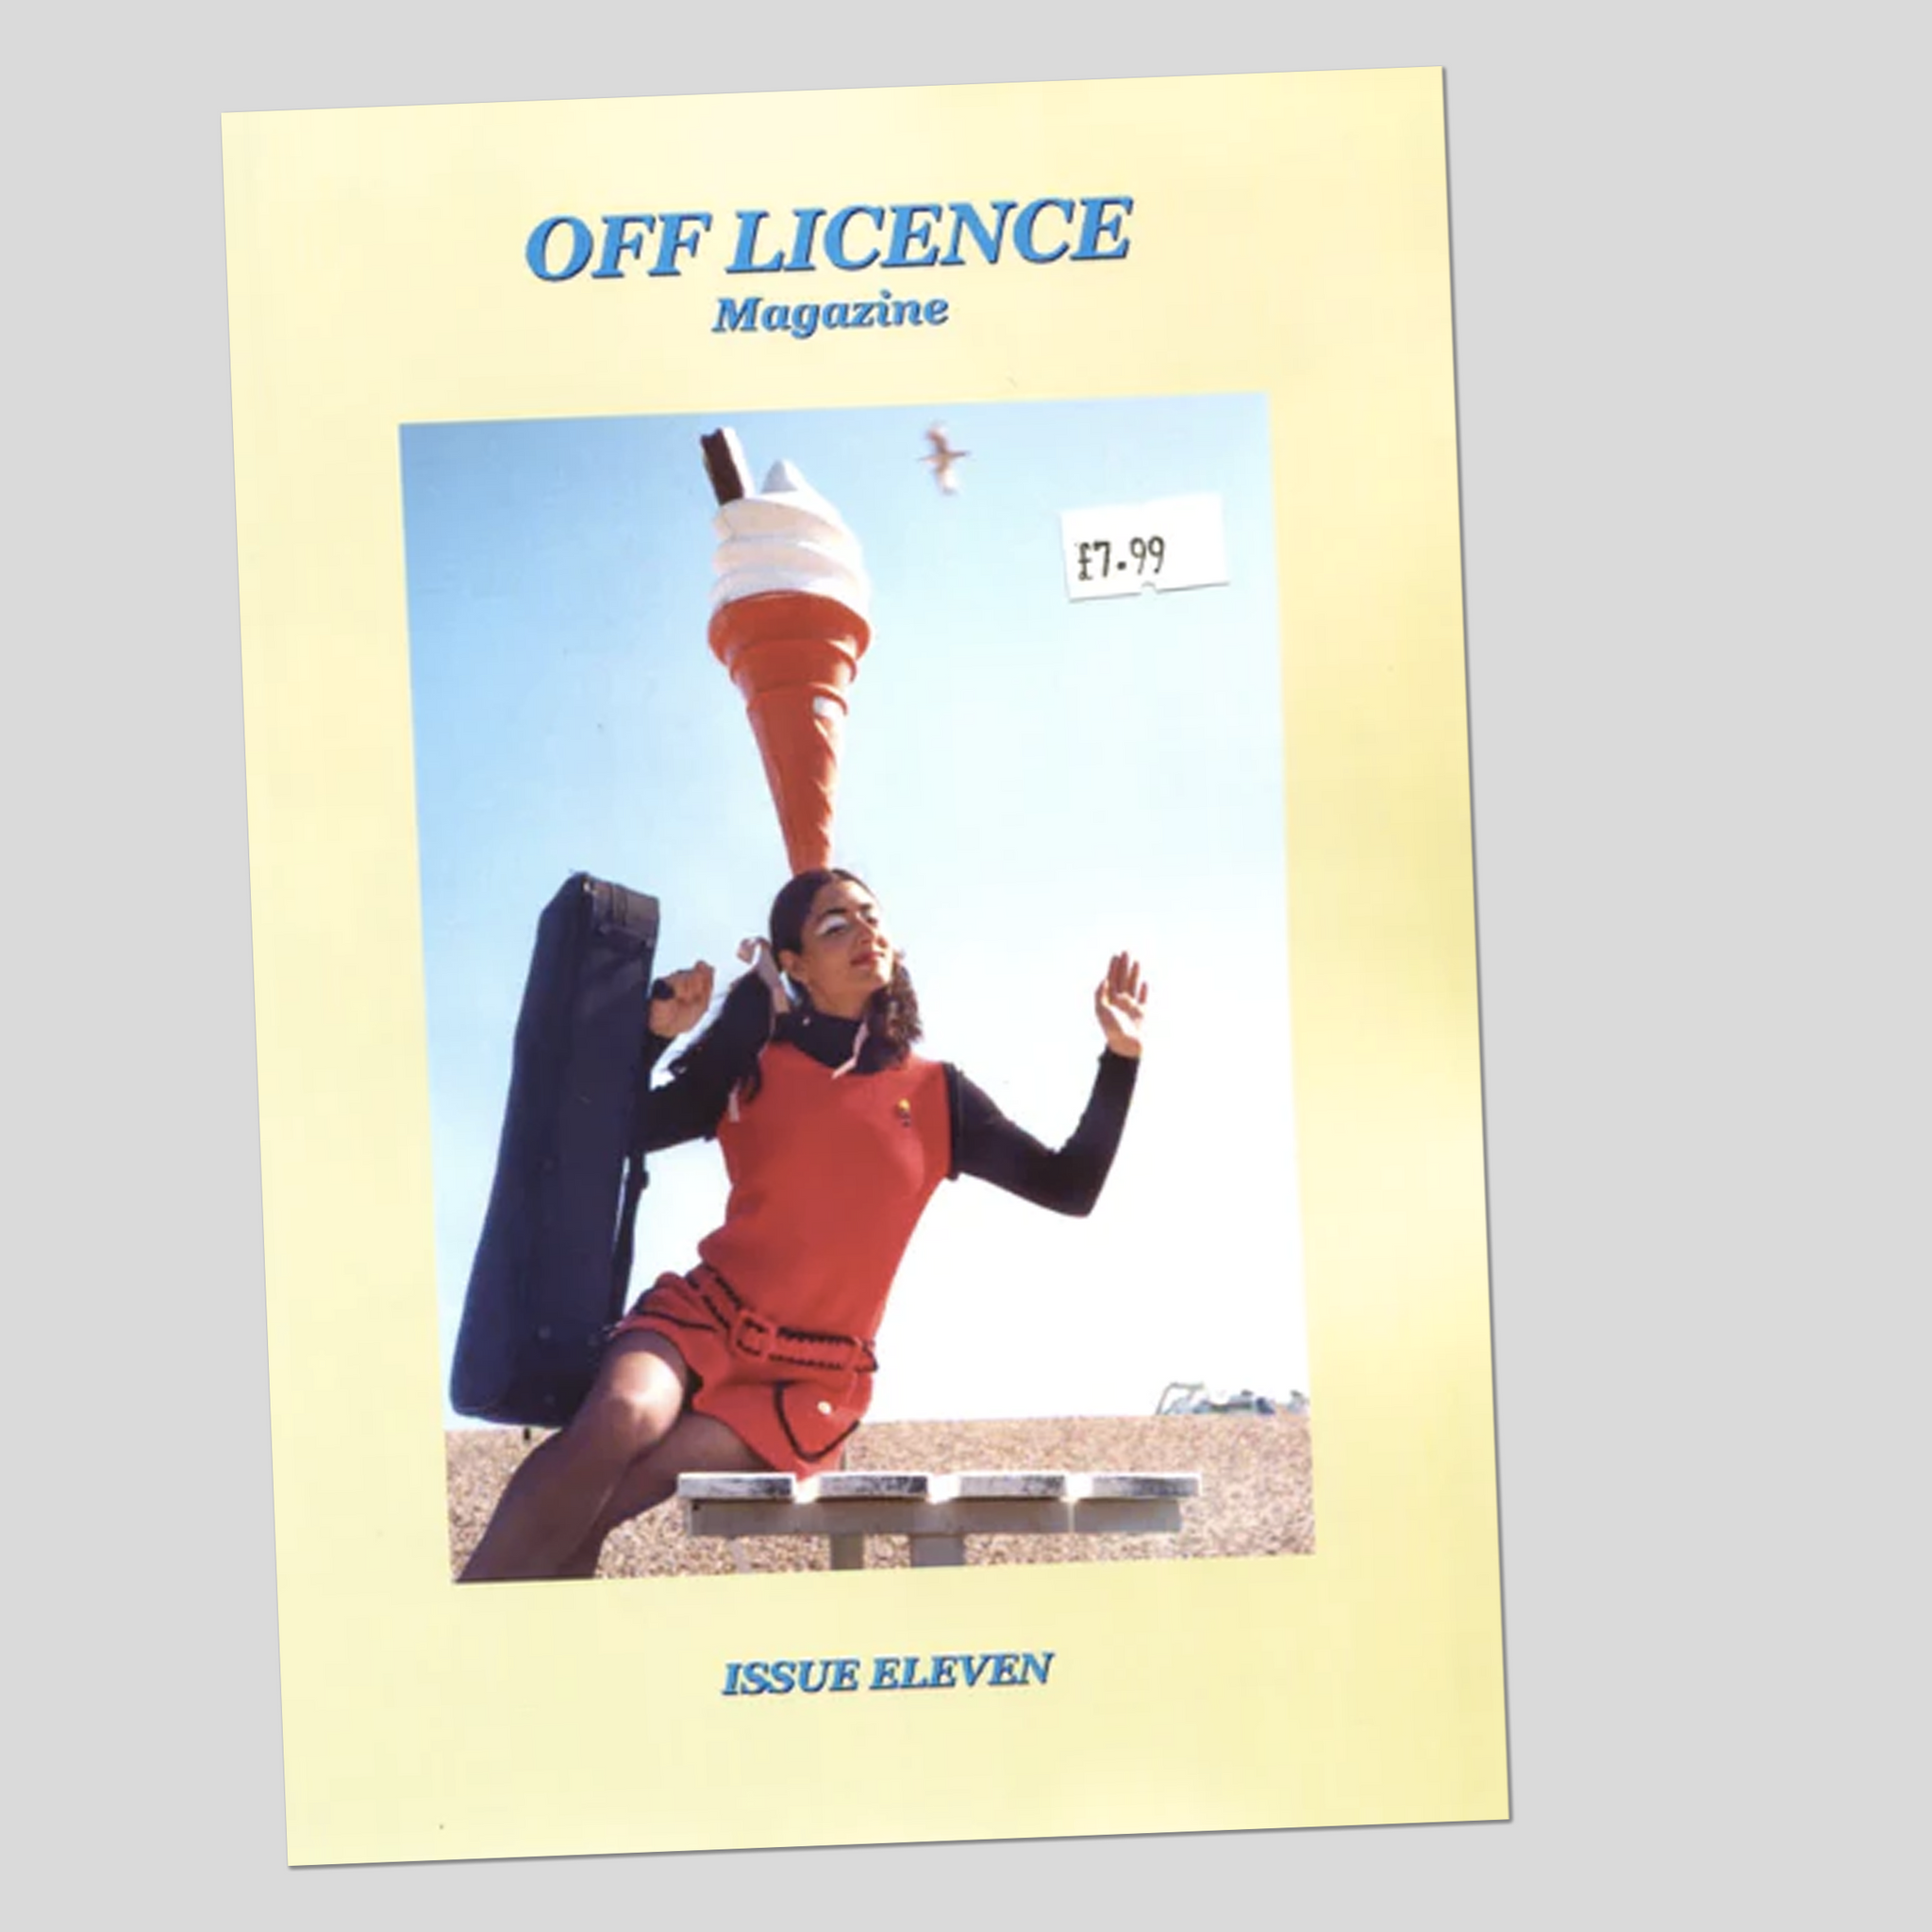 Off licence #11